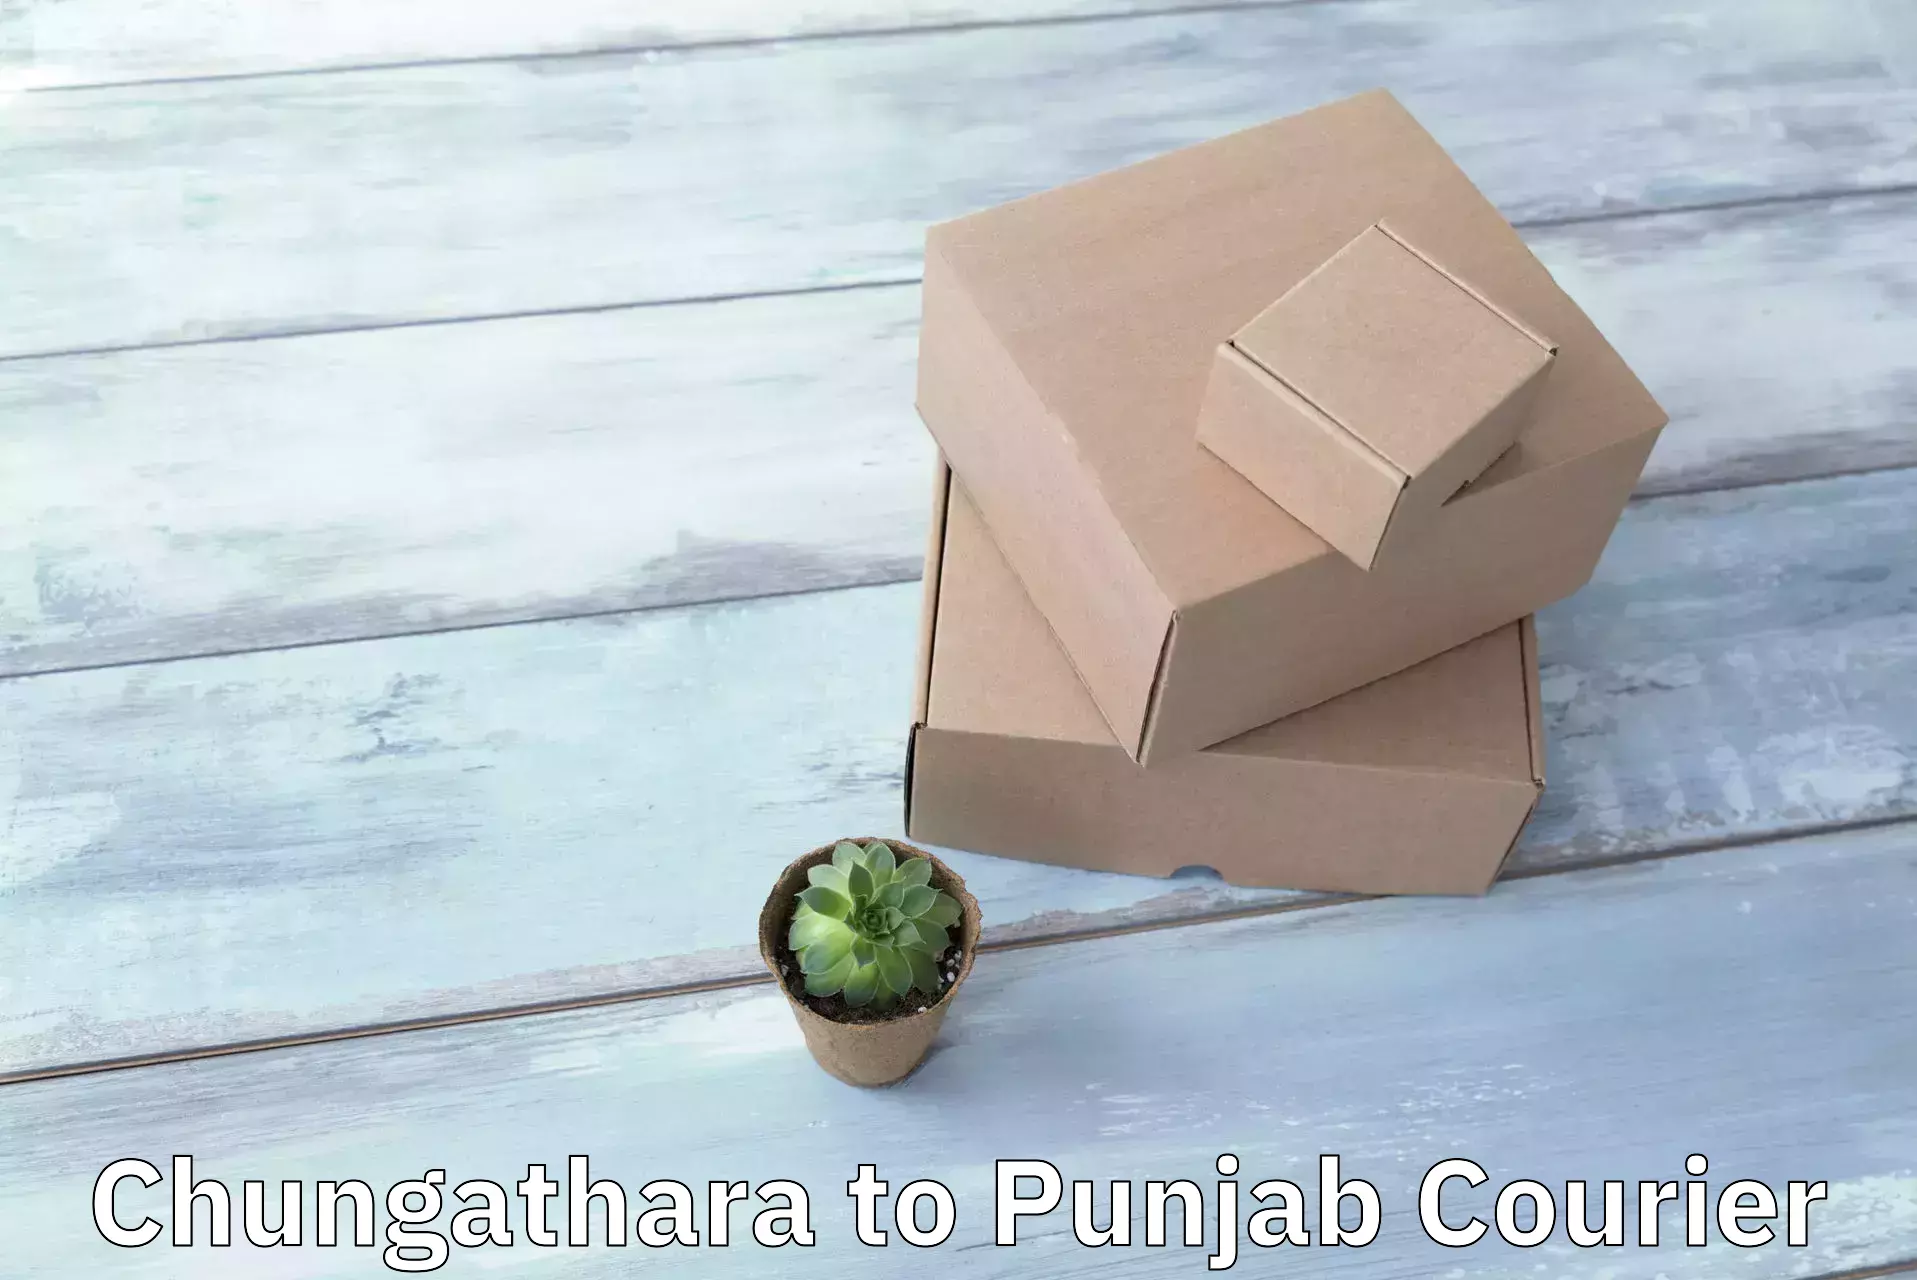 Delivery service partnership Chungathara to Sirhind Fatehgarh